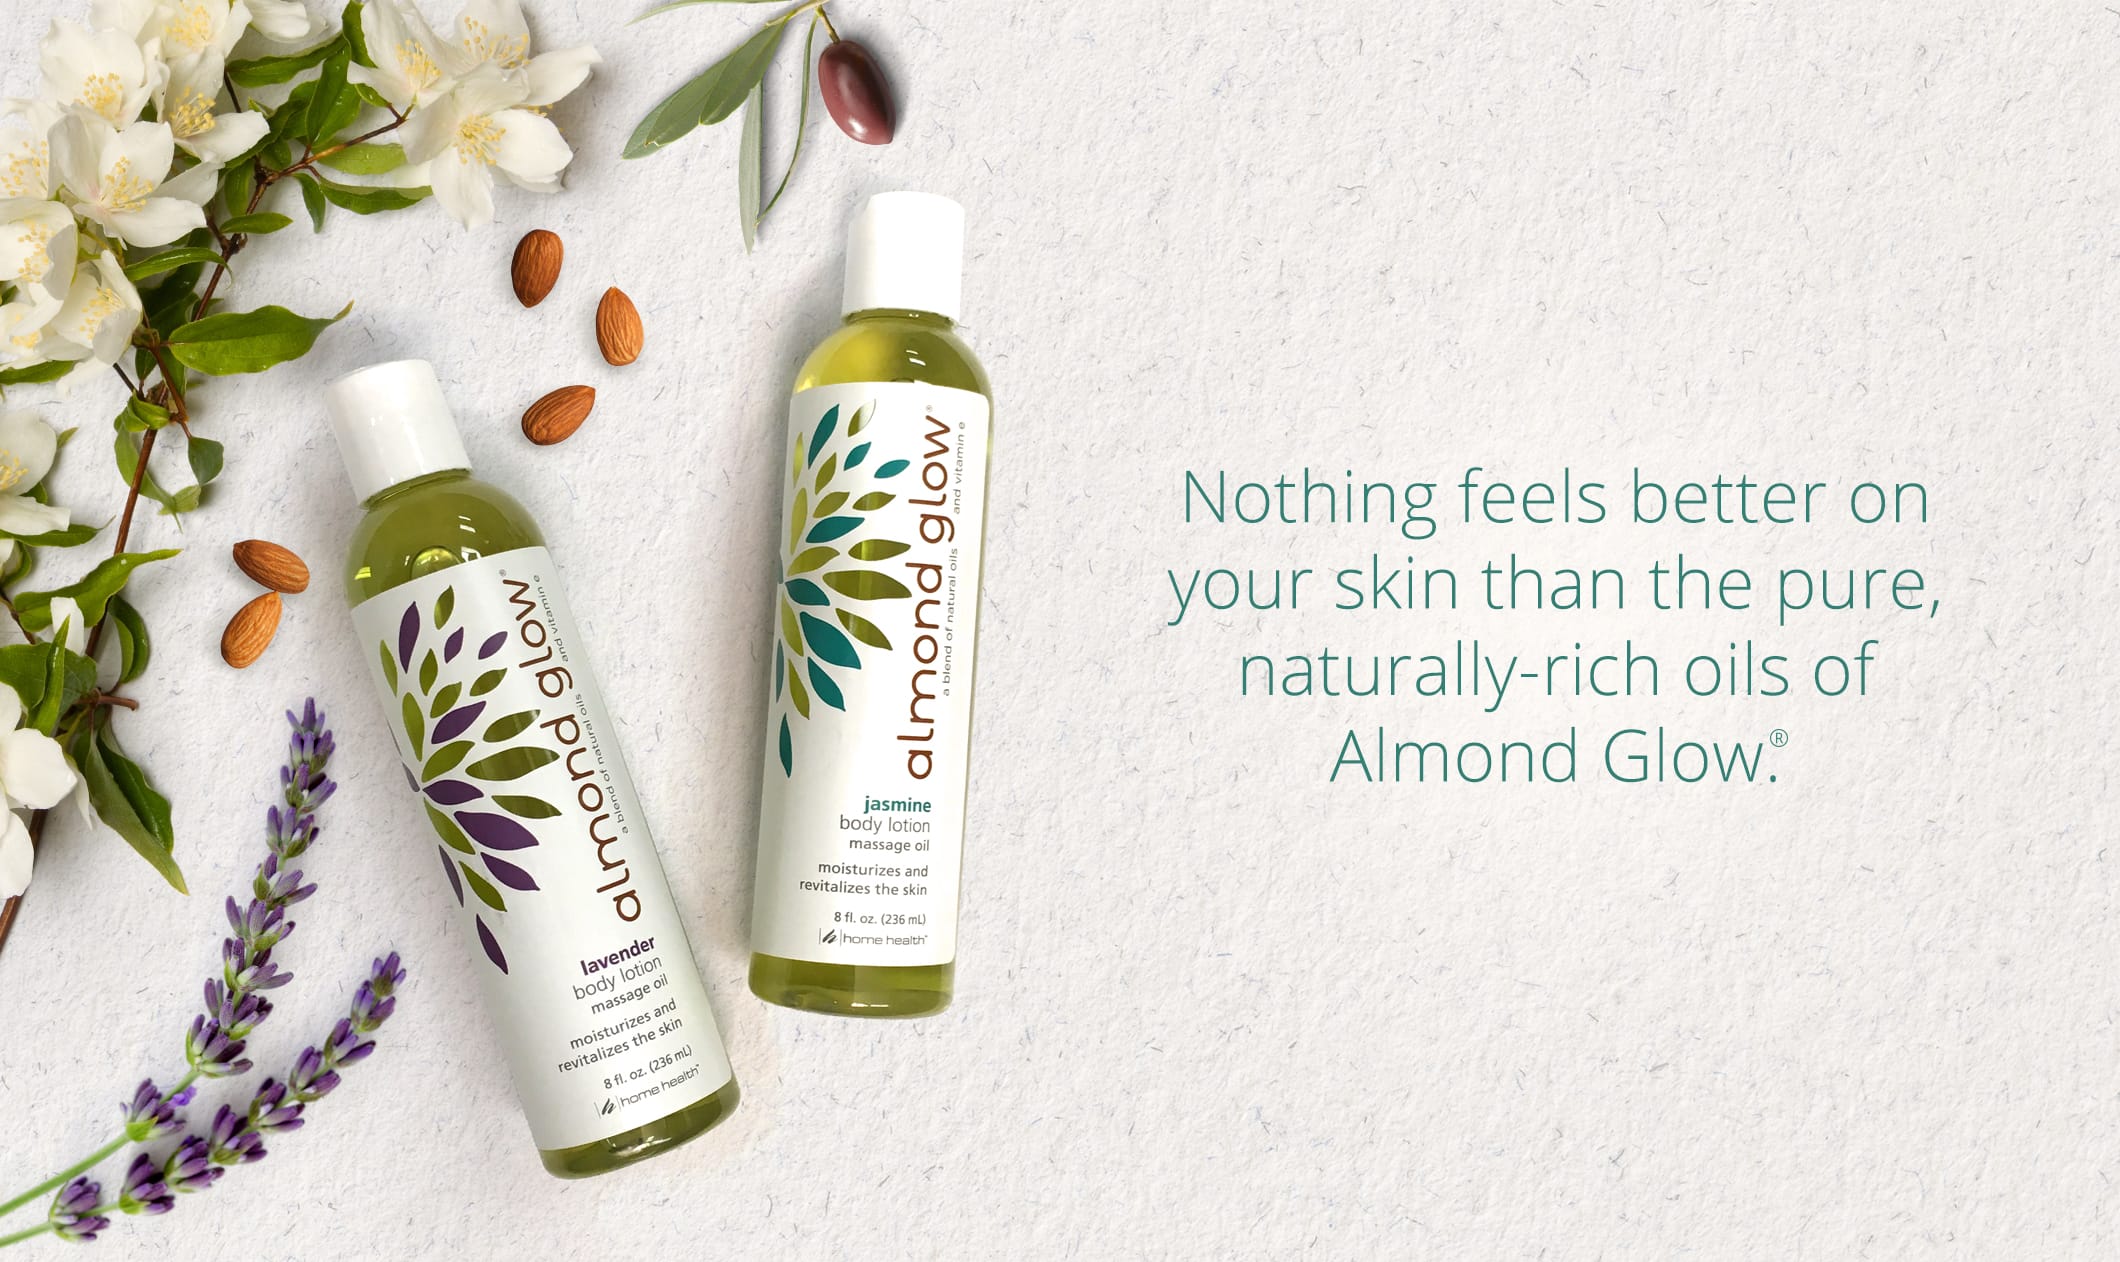 Almond Glow - nothing feels better on your skin than the pure, naturally-rich oils of Almond Glow